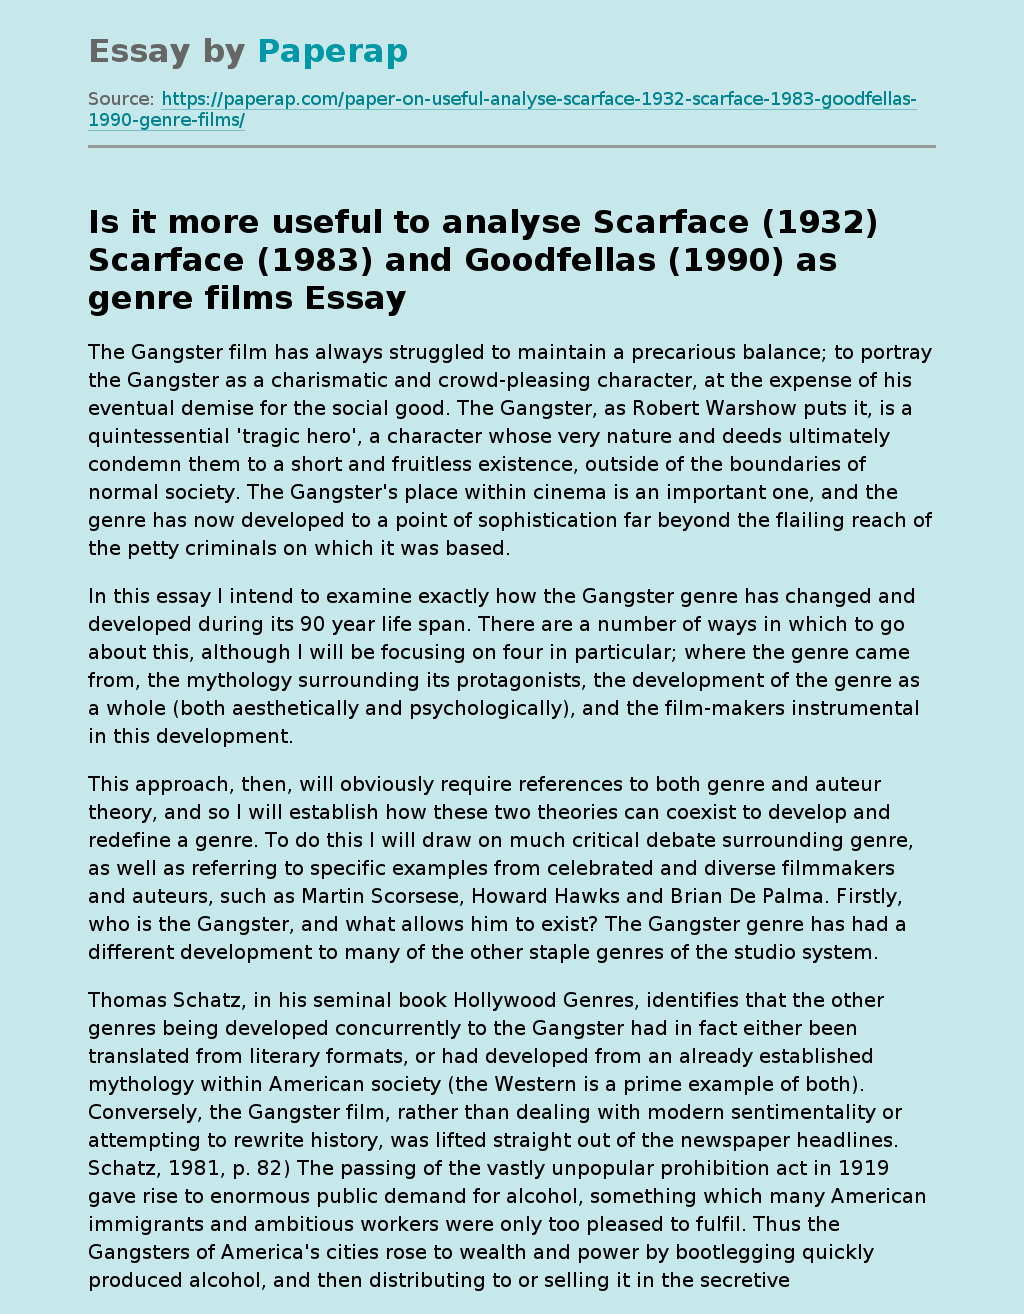 Is it More Useful to analyse Scarface and Goodfellas as Genre Films